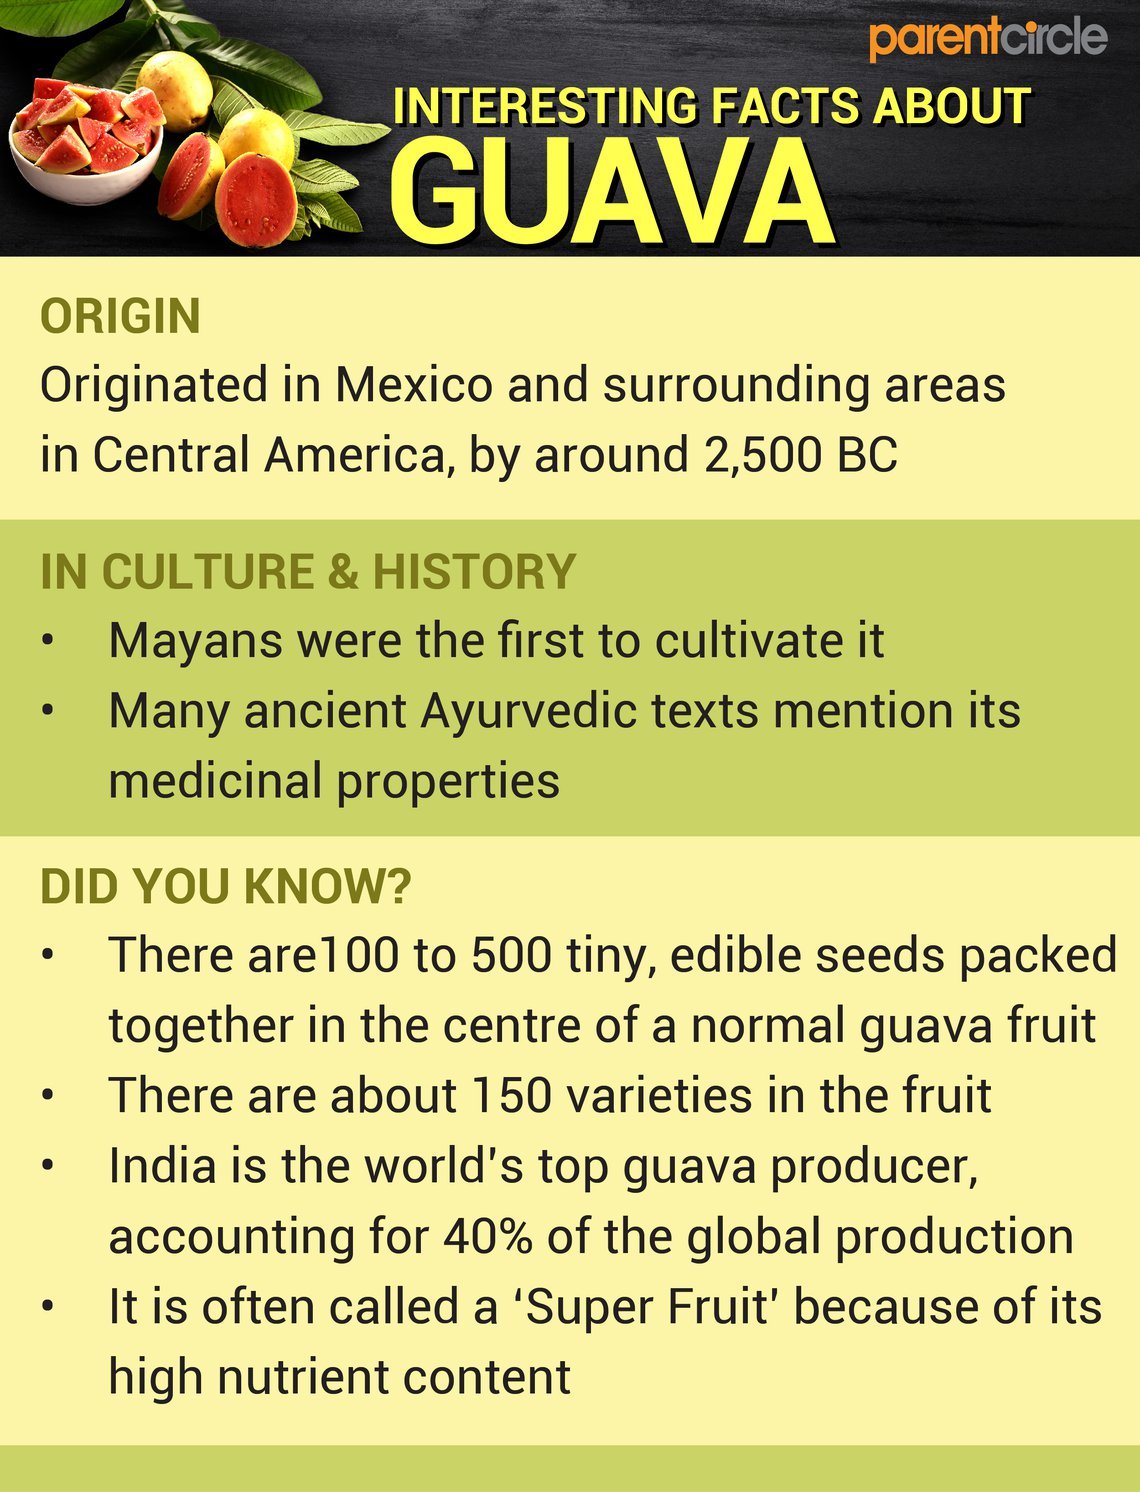 Health Benefits of Guava Fruit & Leaves, Uses of Guava Leaf Parentcircle